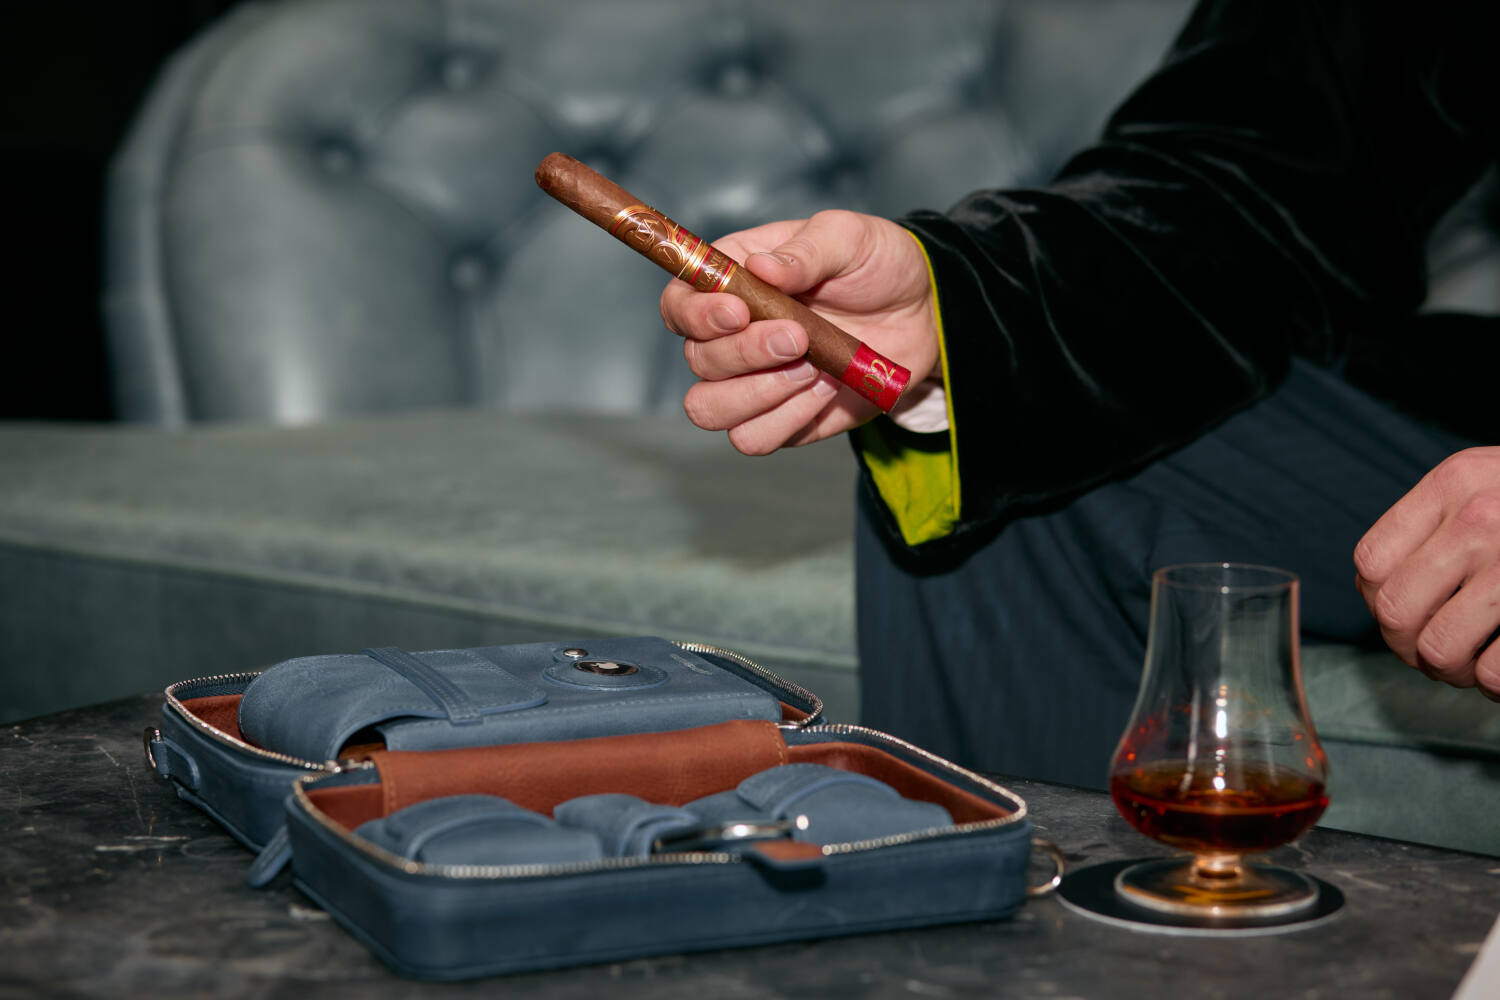 A person examining a fine cigar next to a leather cigar case and a glass of aged whiskey, signifying the luxury of cigar and drink pairings.